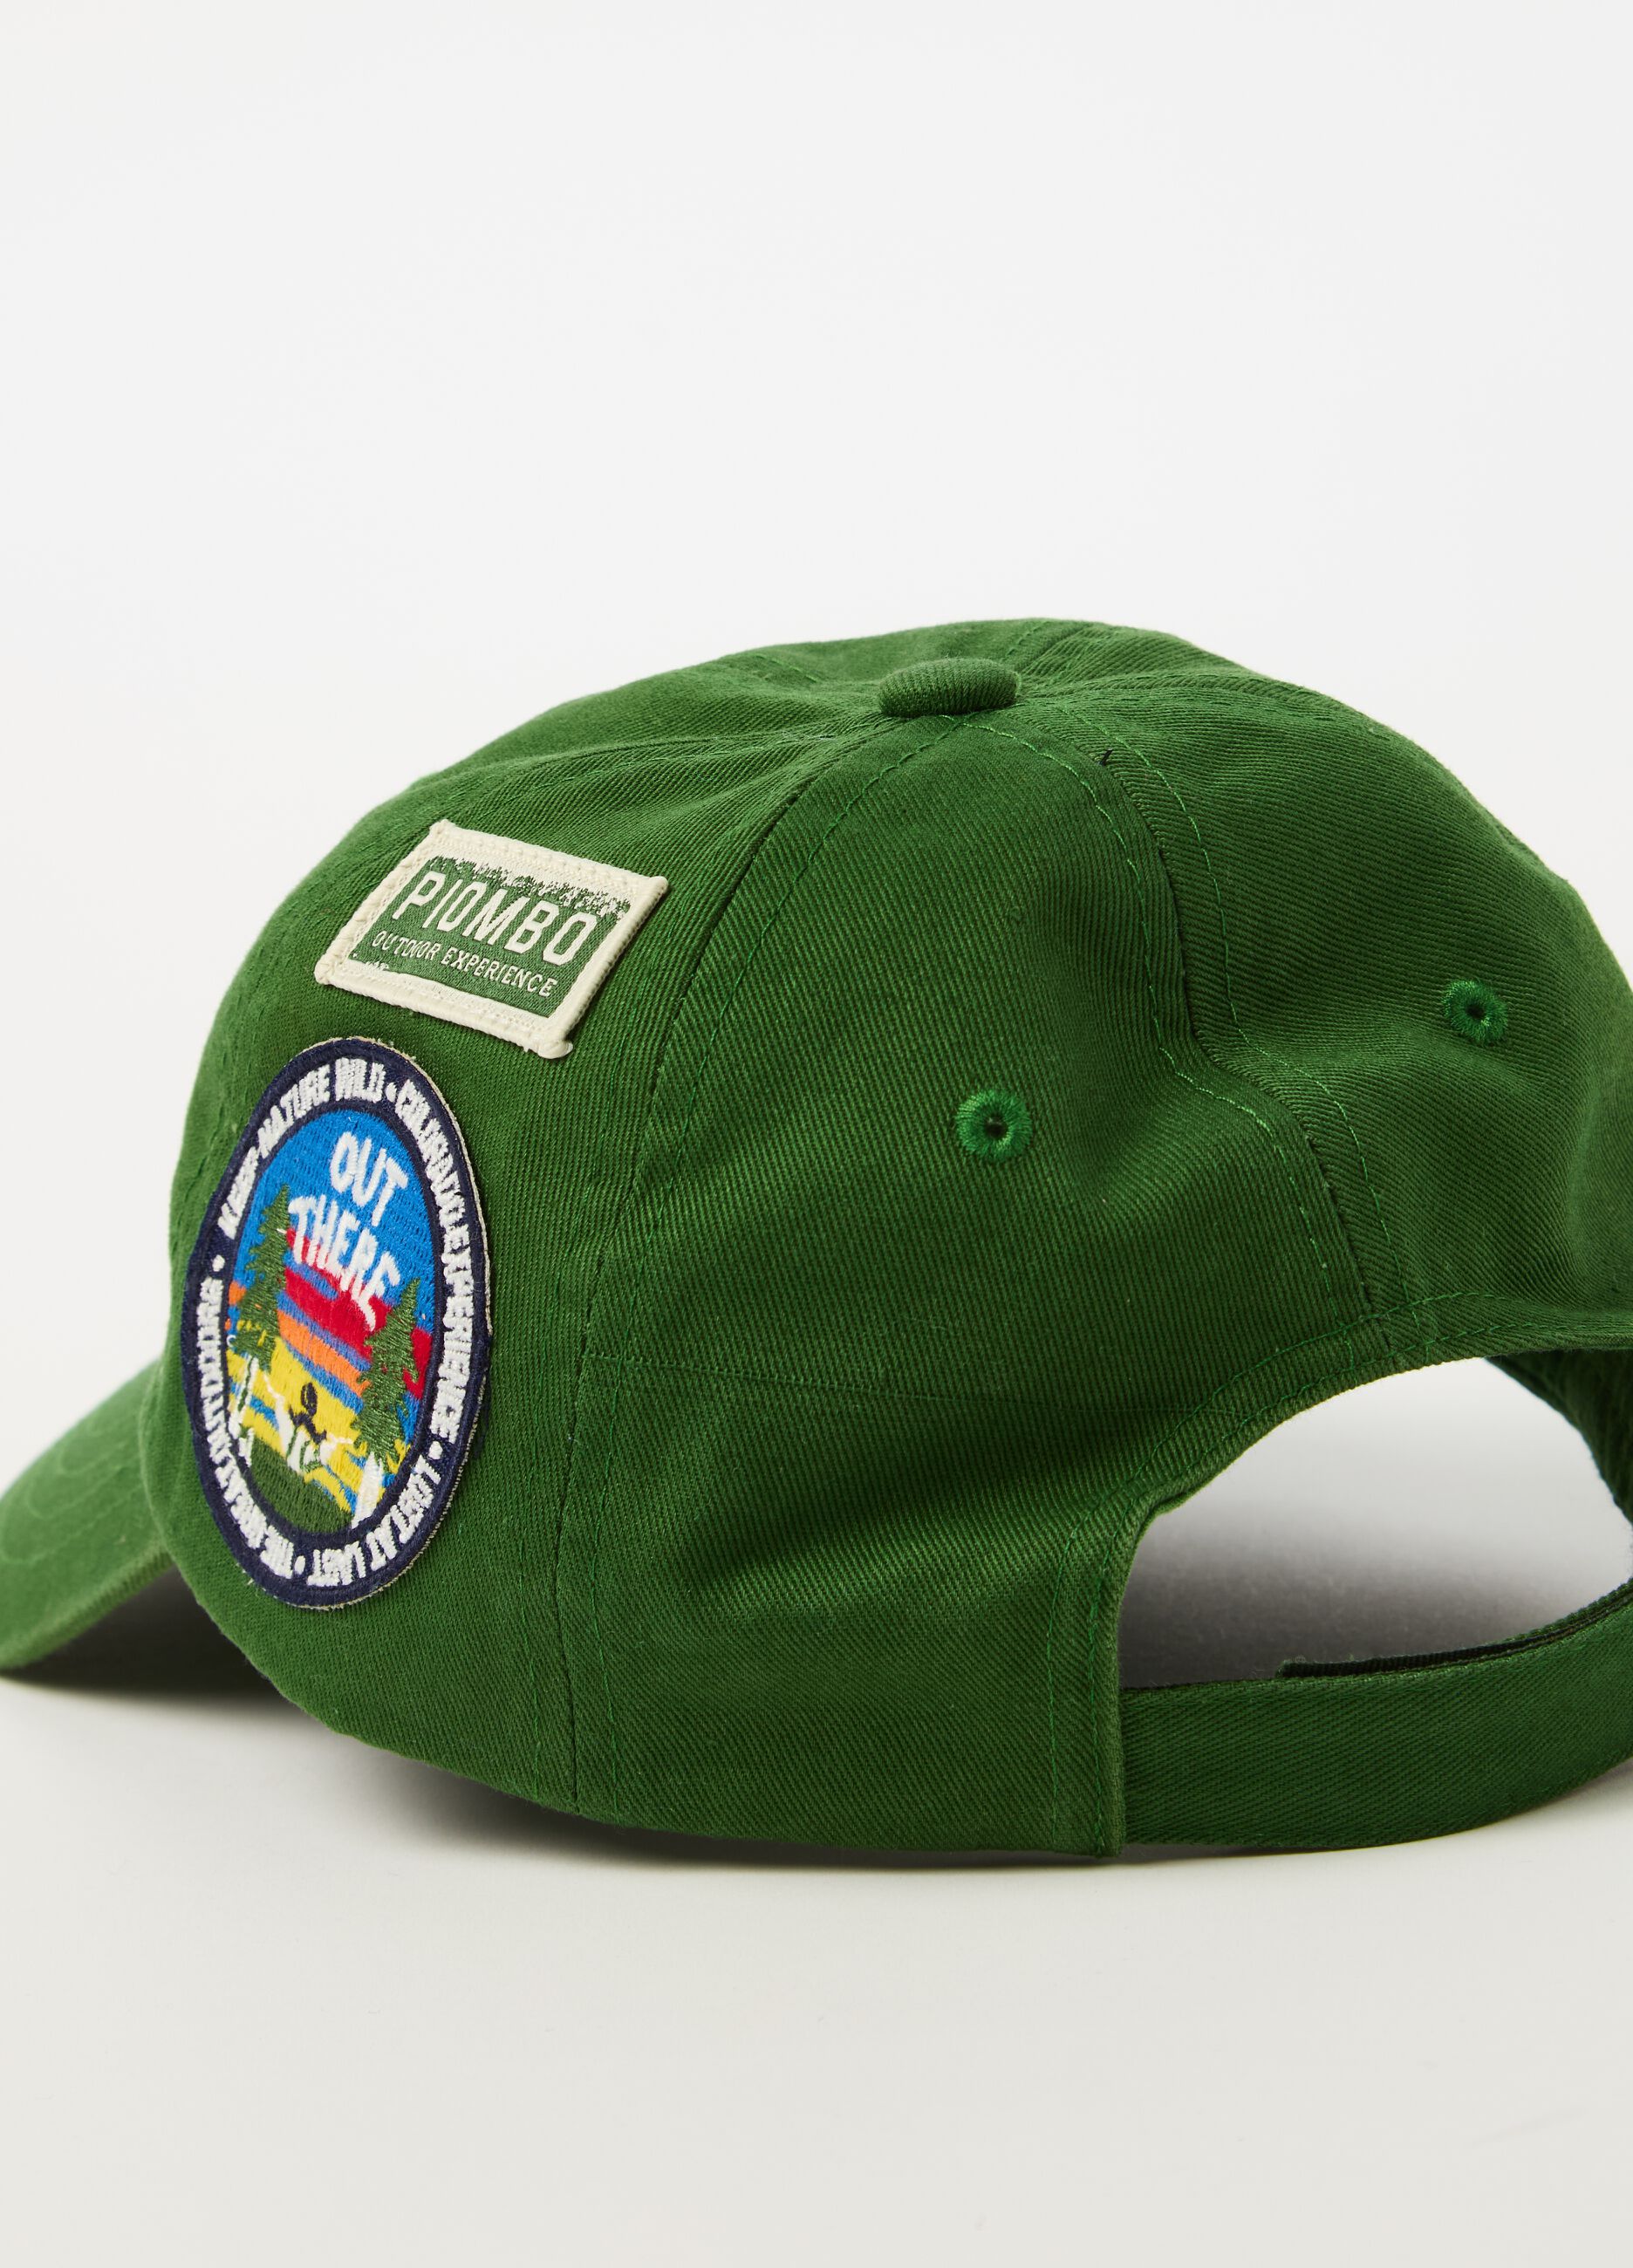 Baseball cap with embroidery and patches